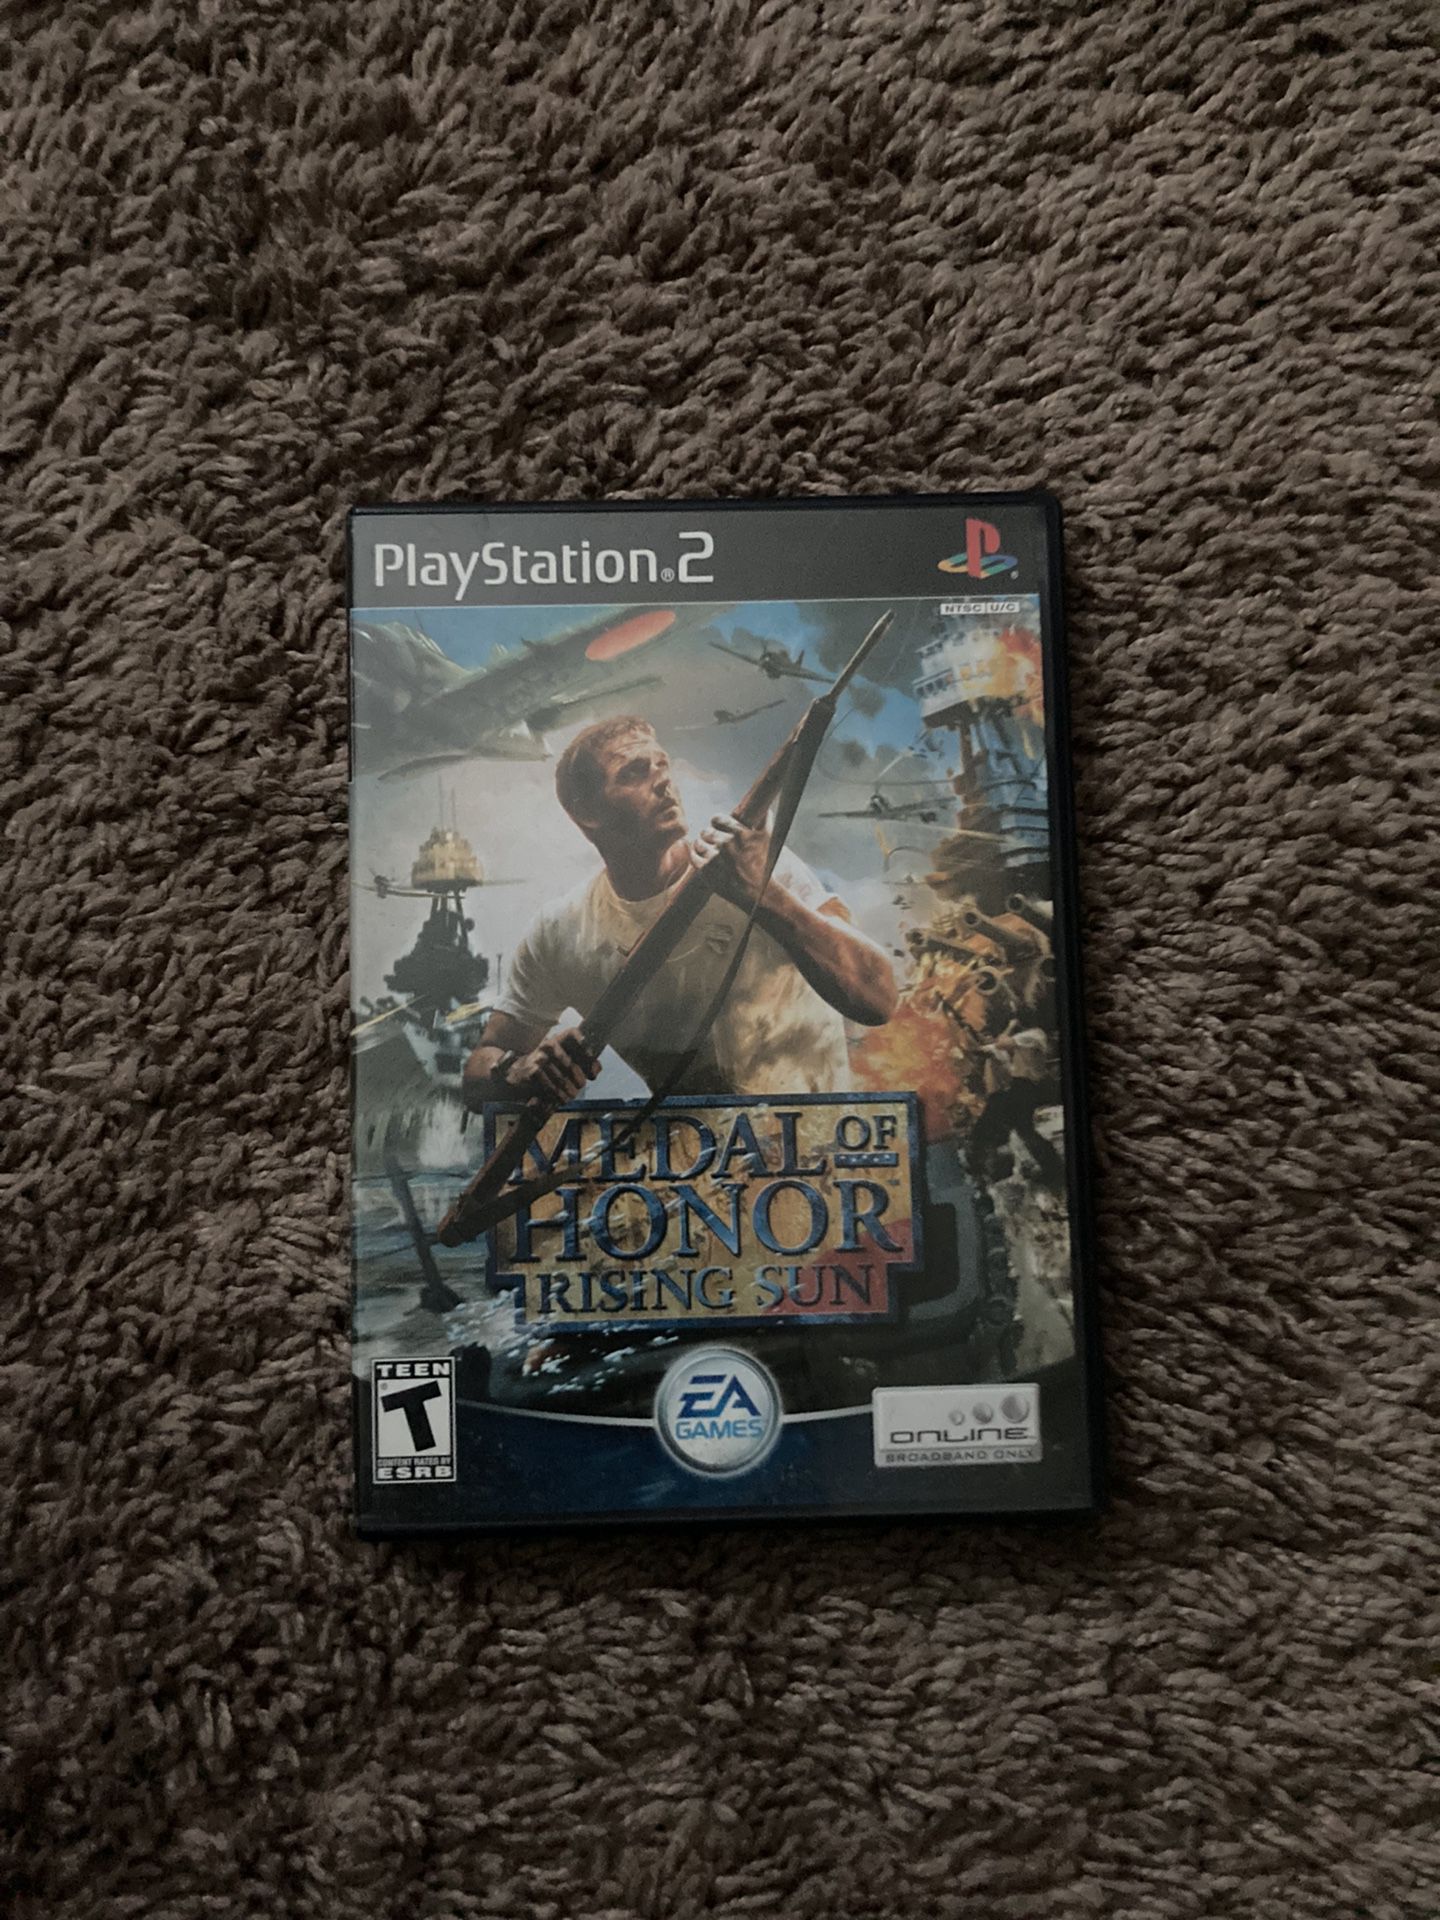 Medal Of Honor Rising Sun PS2 for Sale in Moreno Valley, CA